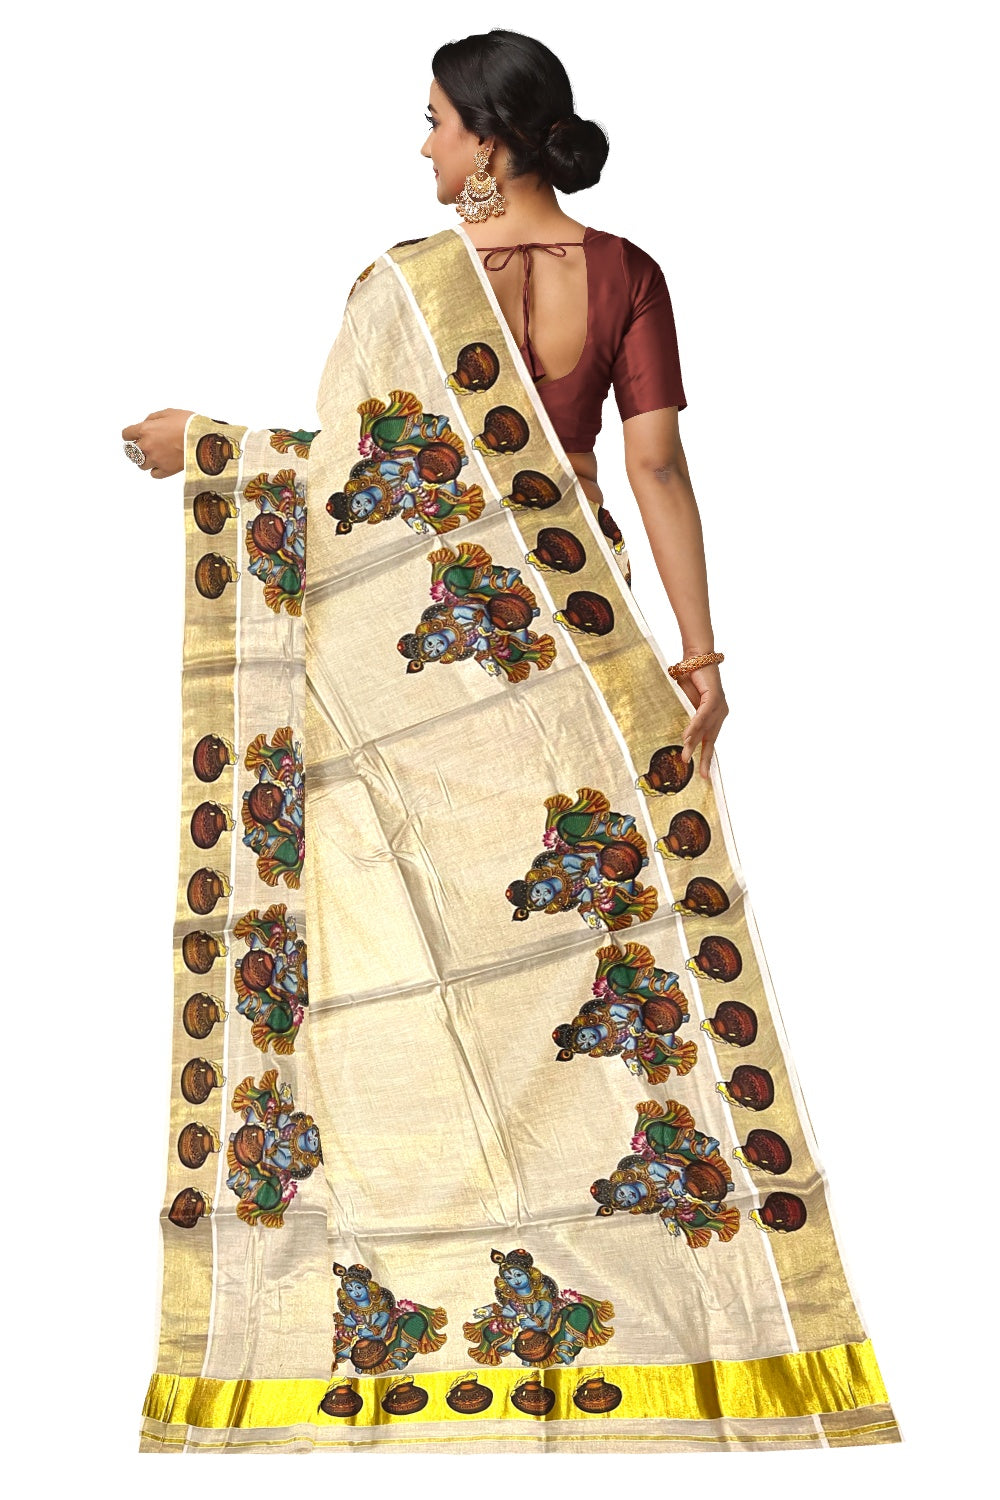 Kerala Tissue Kasavu Saree With Mural Printed Lord Krishna Design and Butter Pot Works on Border